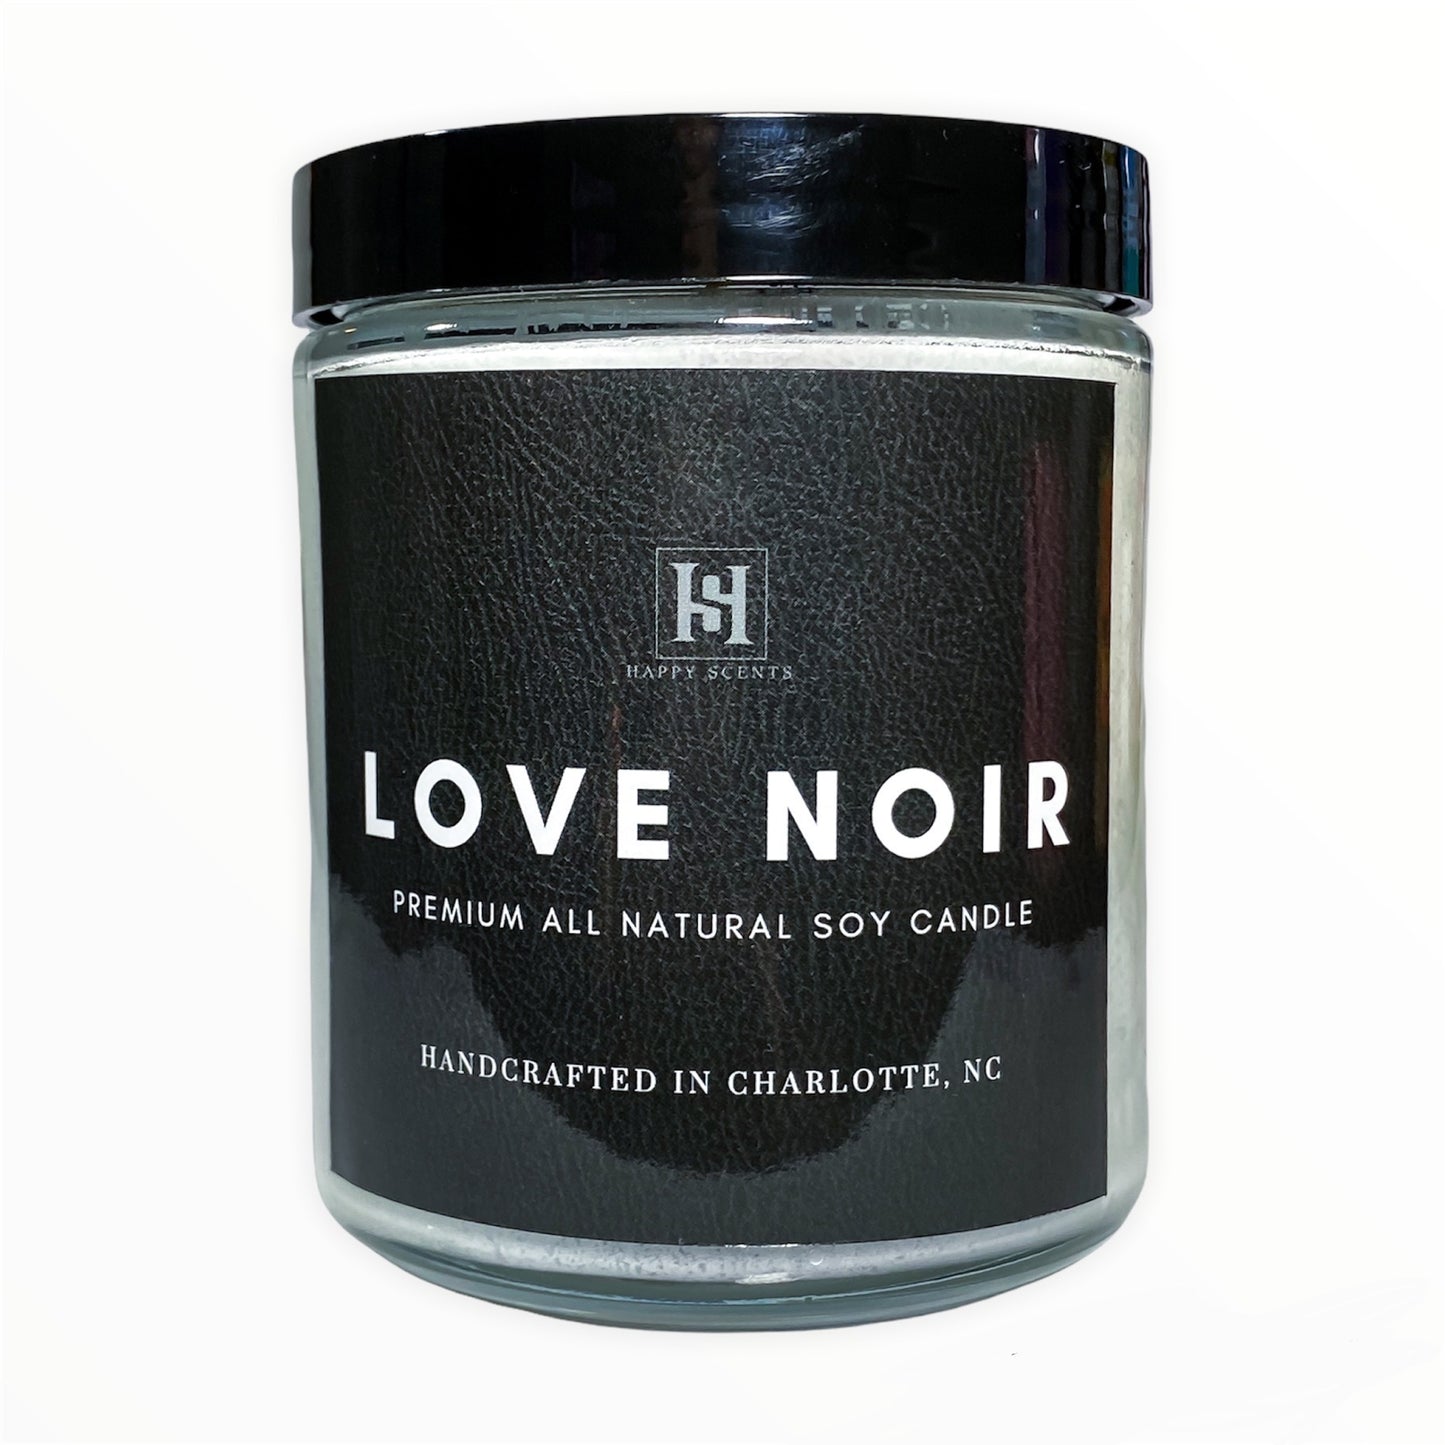 Love Noir Jar Candle. Earthy Scented Candle. Sultry Candle. Sandalwood, Musk, Amber and Mandarin.